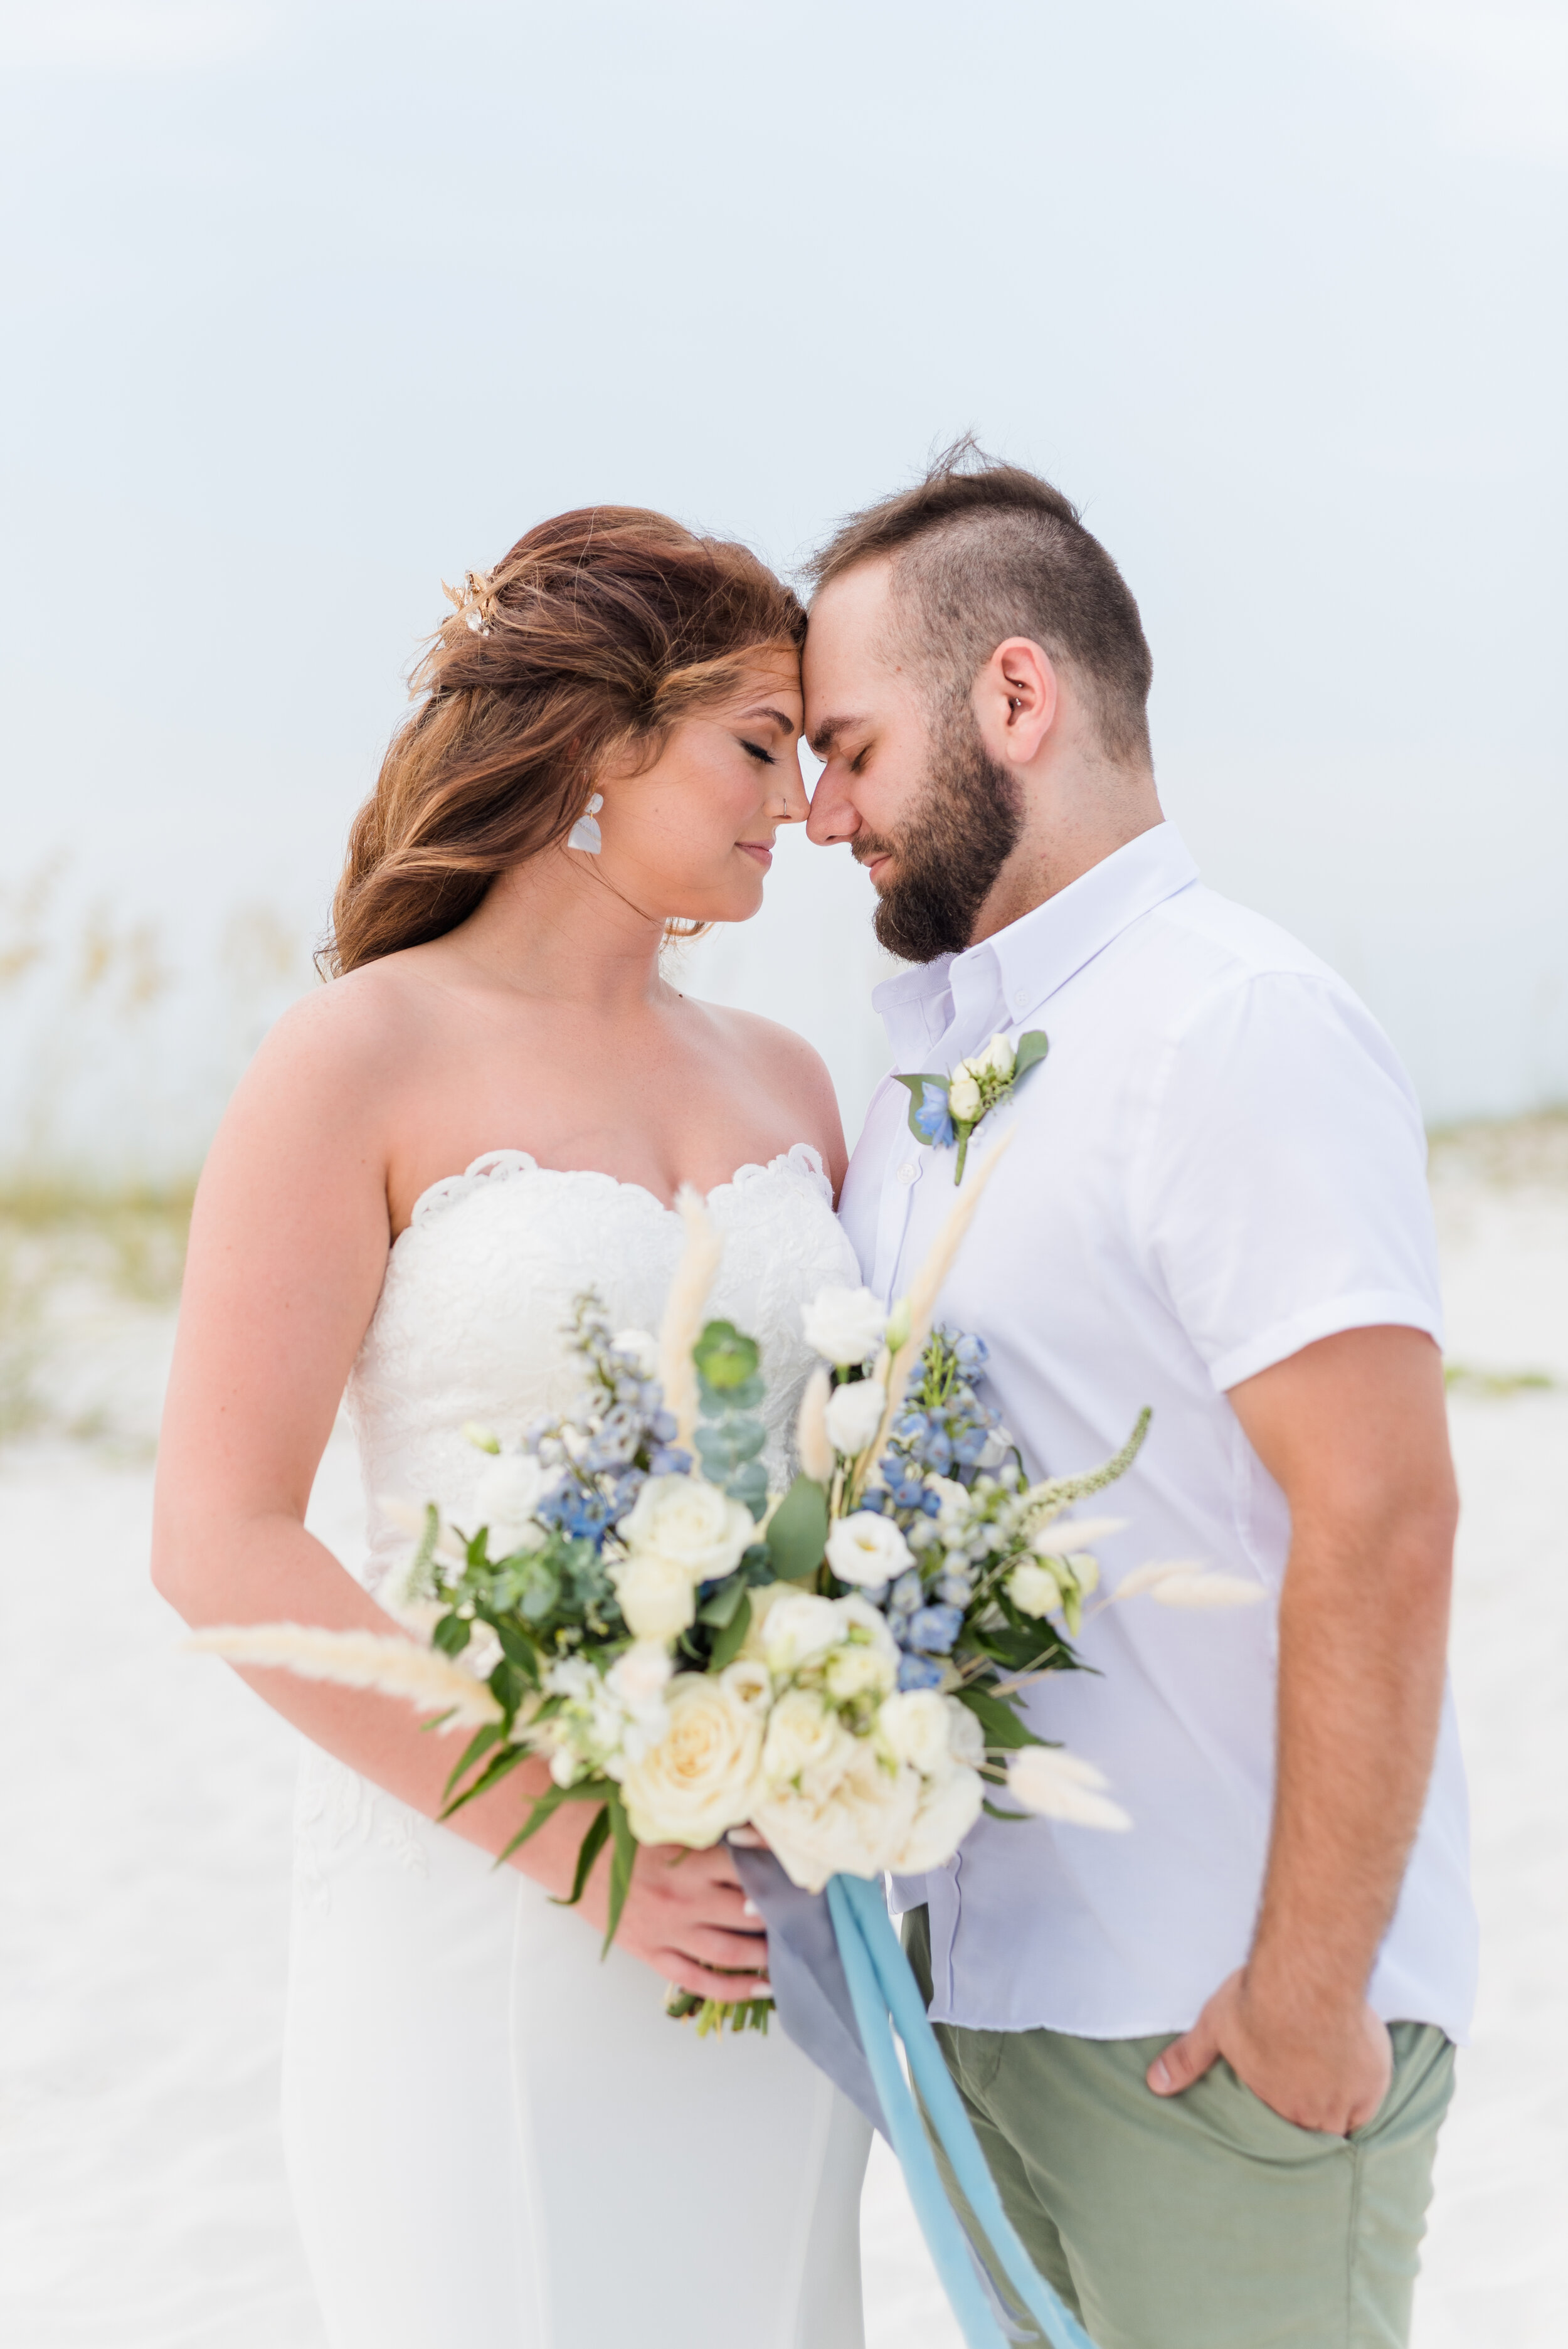 July Orange Beach Wedding Bride and Groom Couples Portraits Photographed by Kristen Marcus Photography